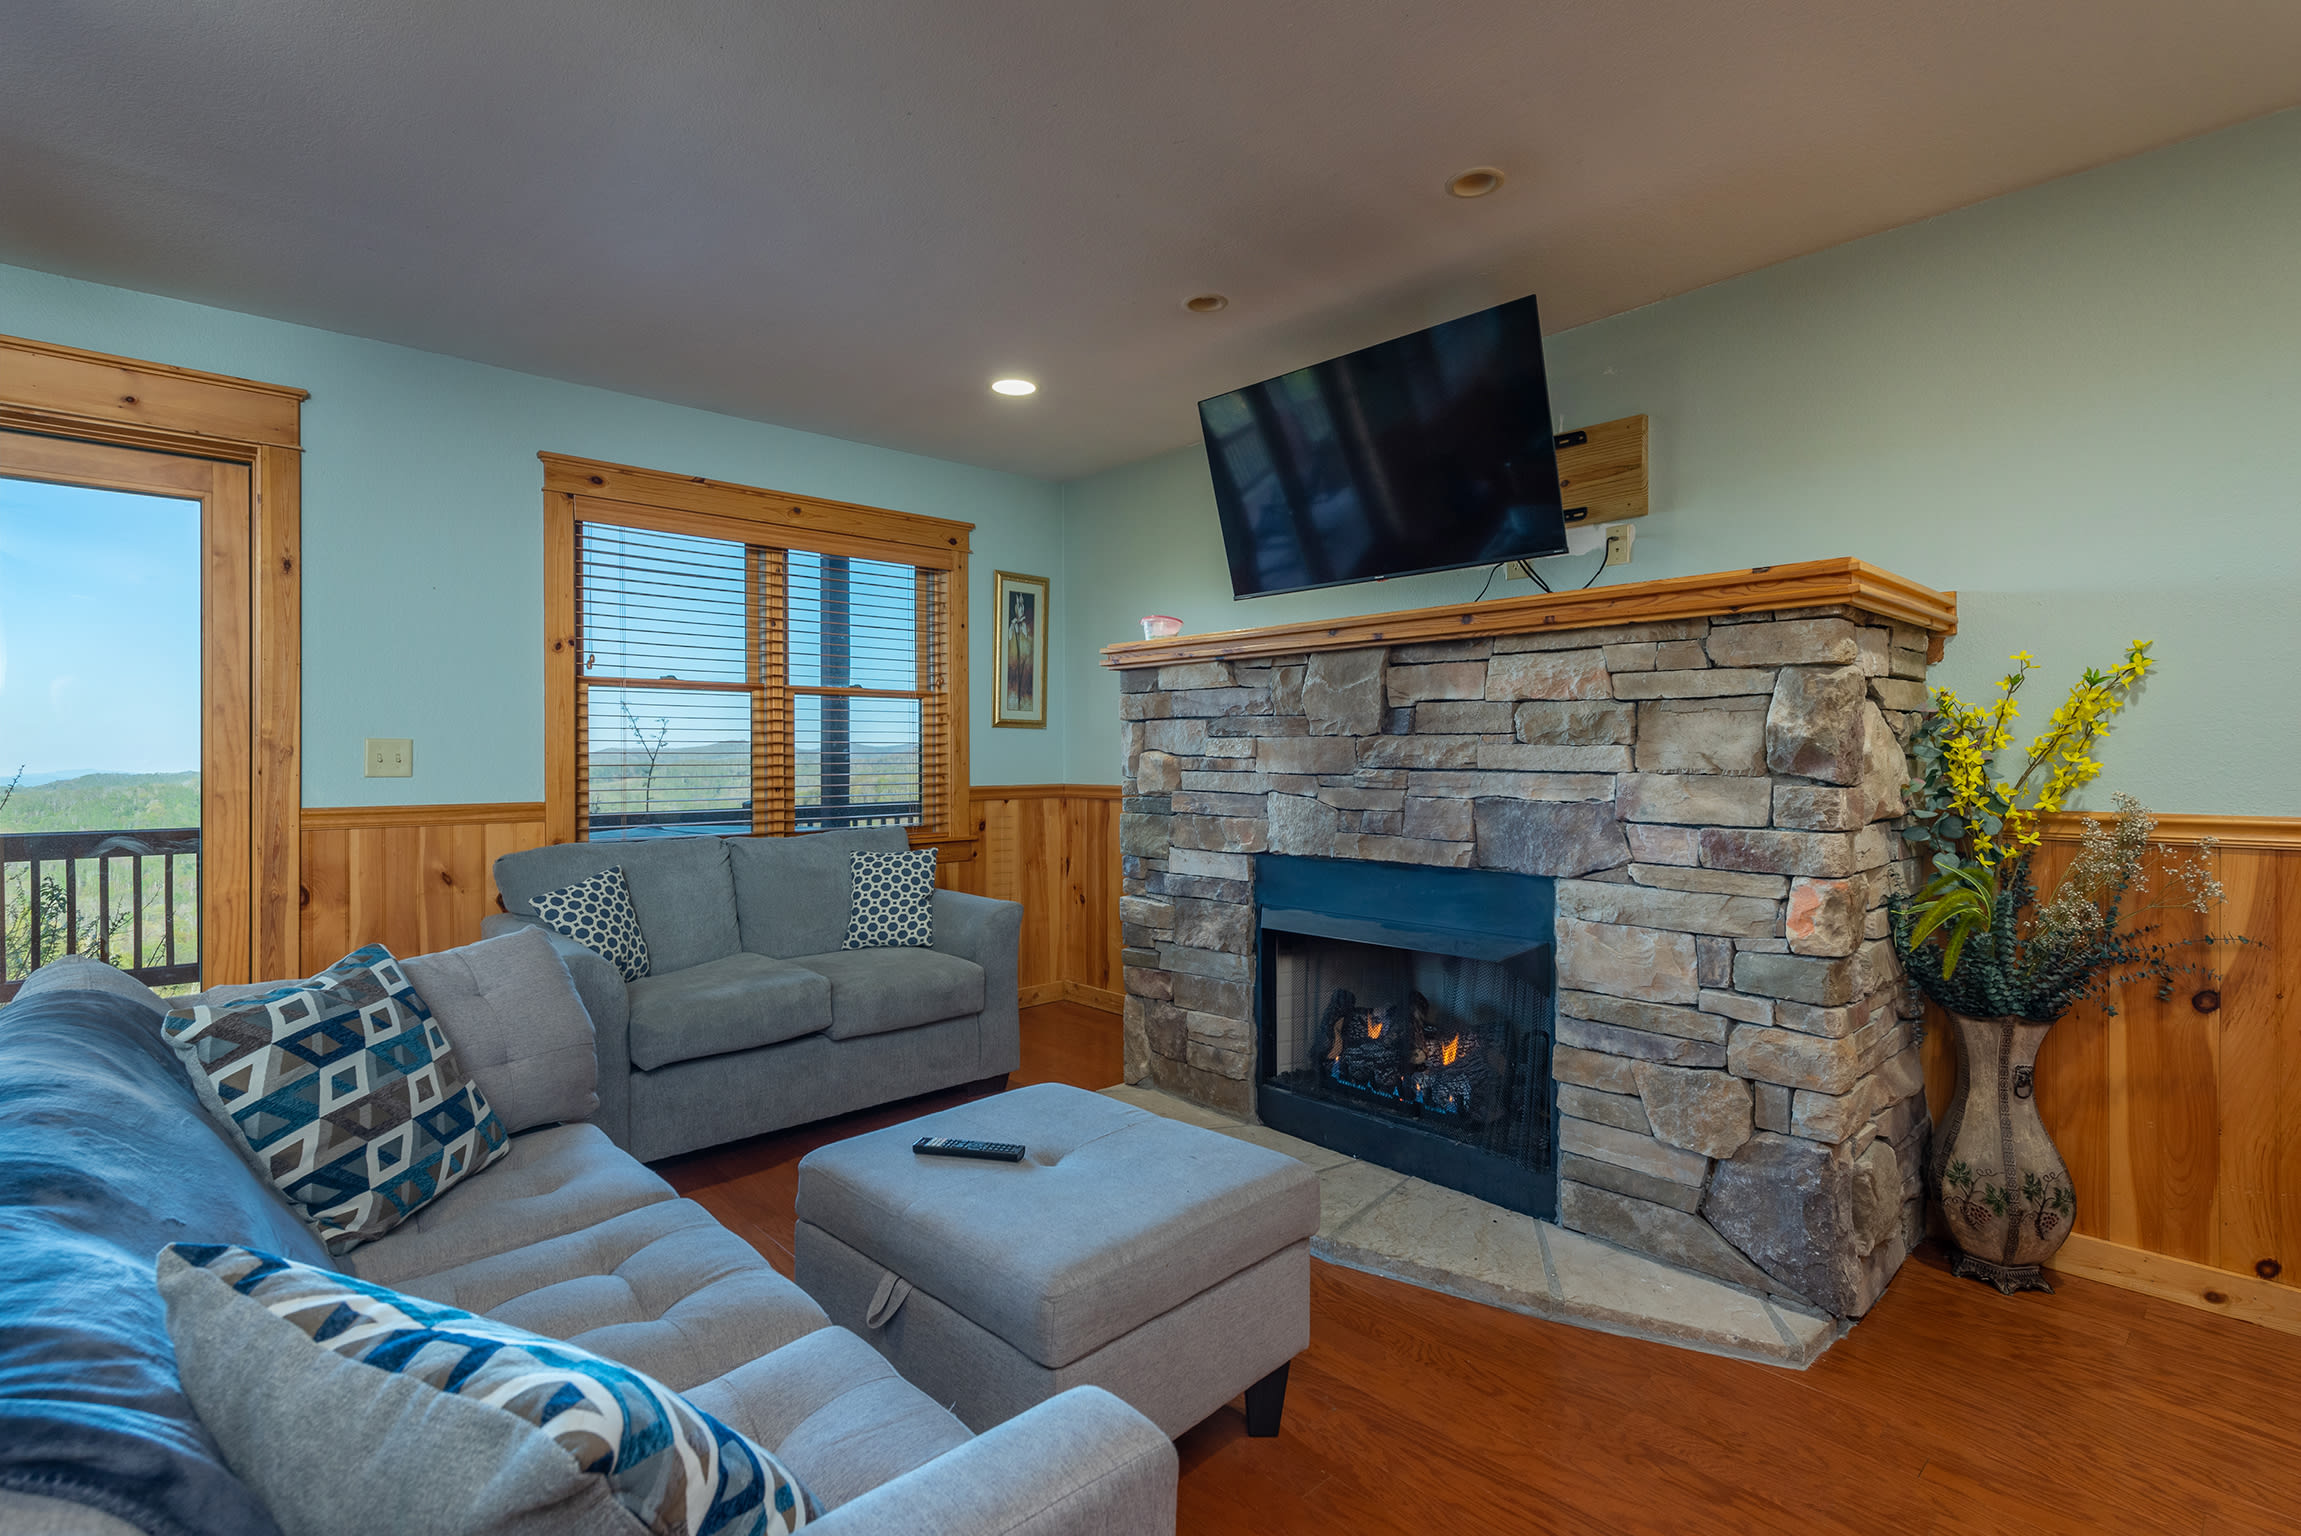 Enjoy a movie and fire after a fun mountain day!